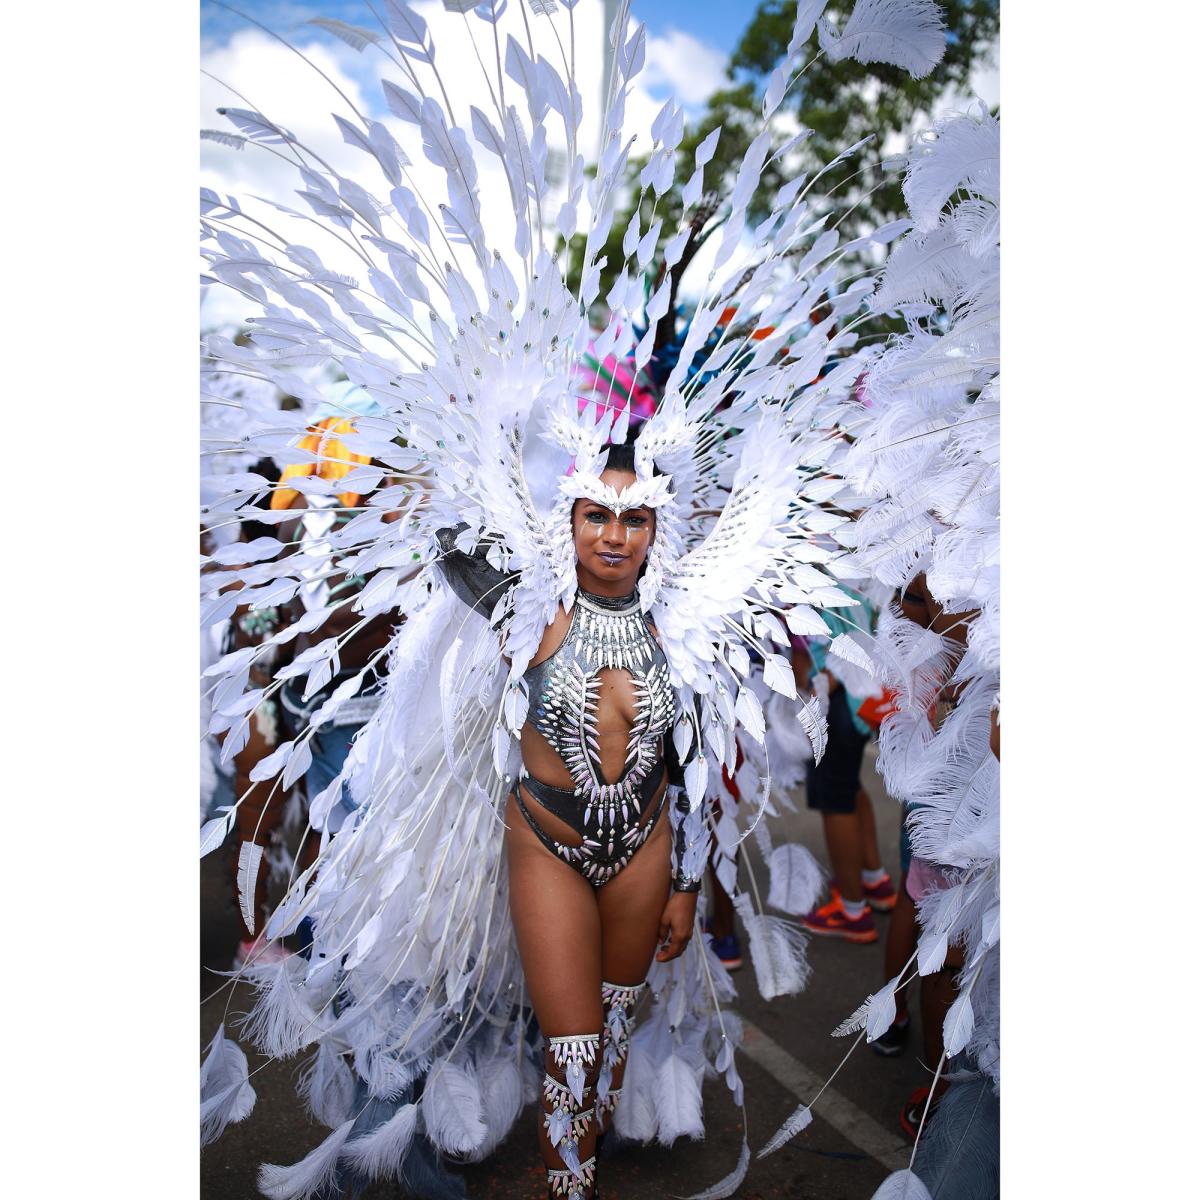 All the Amazing Costumes, Makeup, and Hair We Saw on Carnival Tuesday